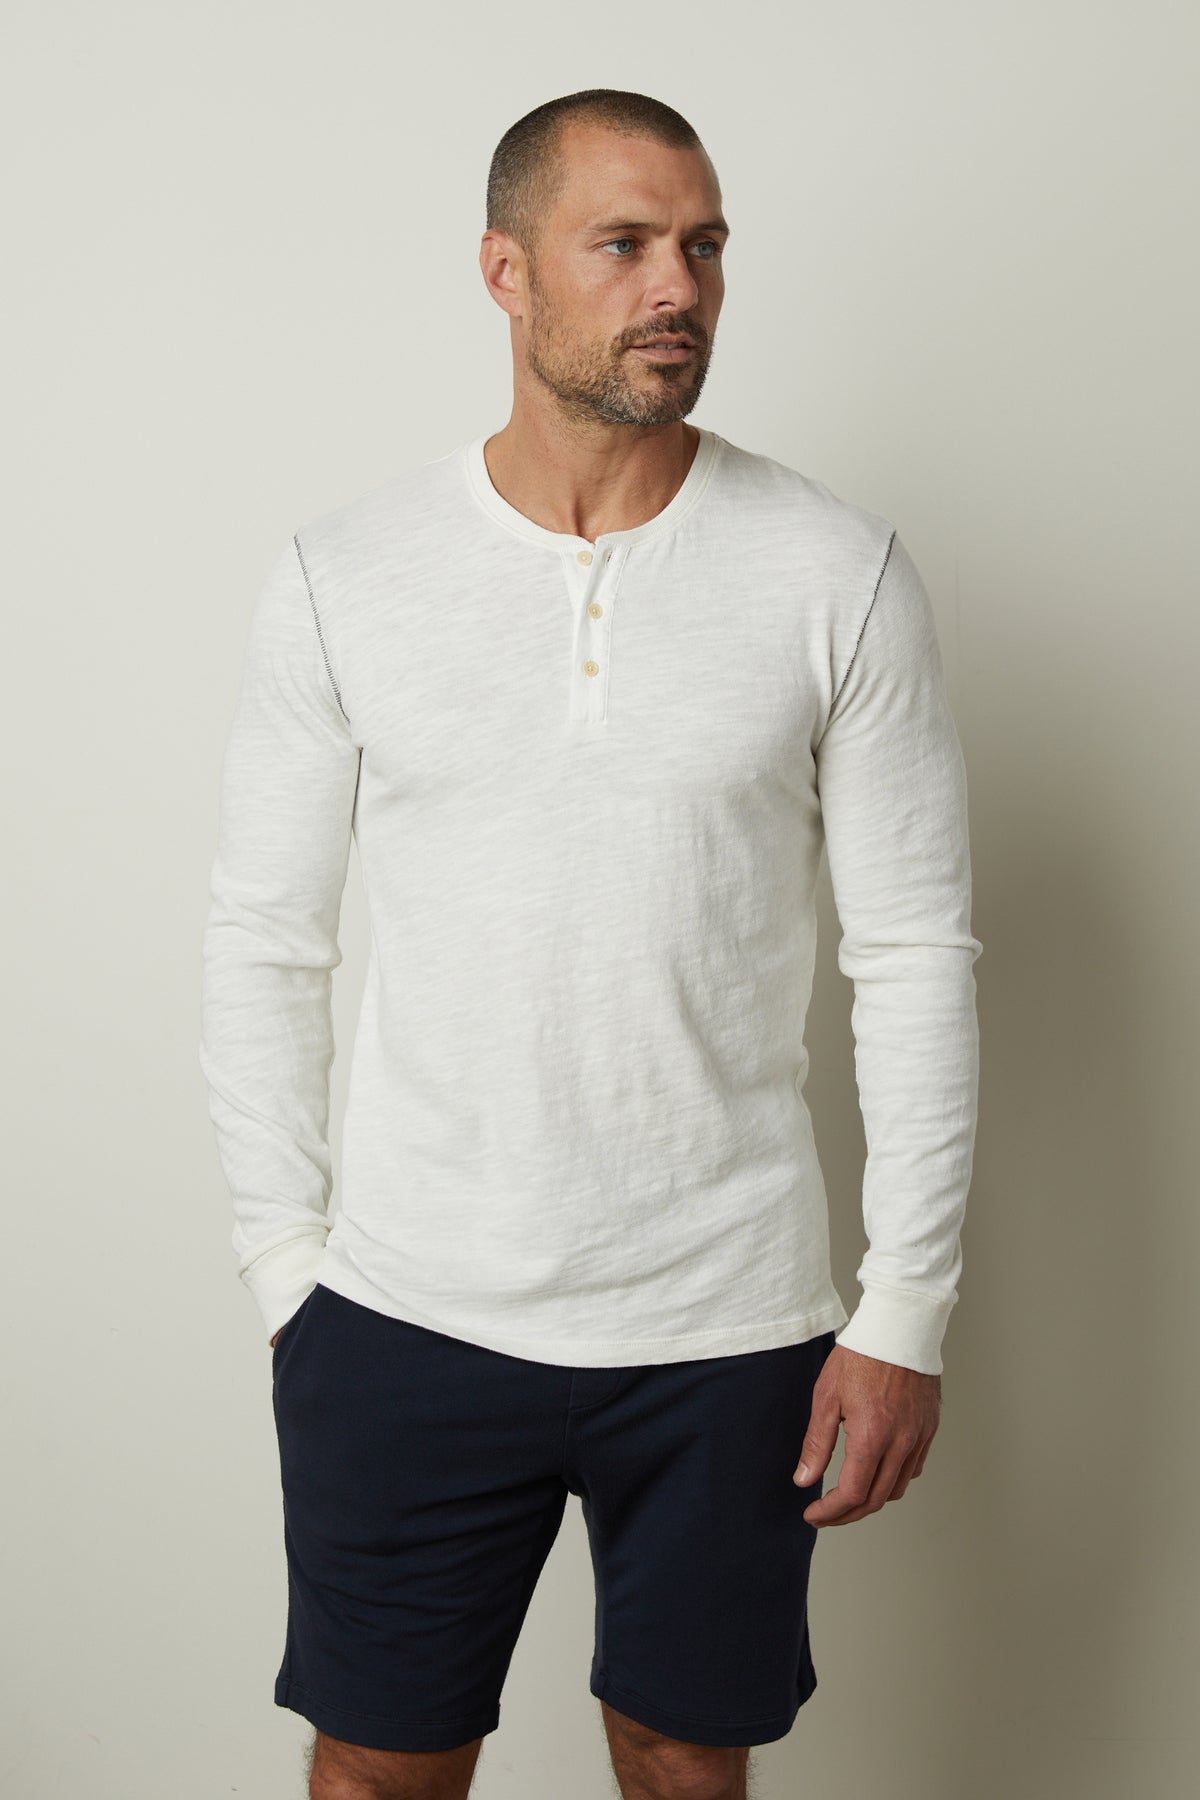 A man wearing a white Gabe Henley shirt by Velvet by Graham & Spencer in a cotton slub fabric, paired with blue shorts.-35662699397313